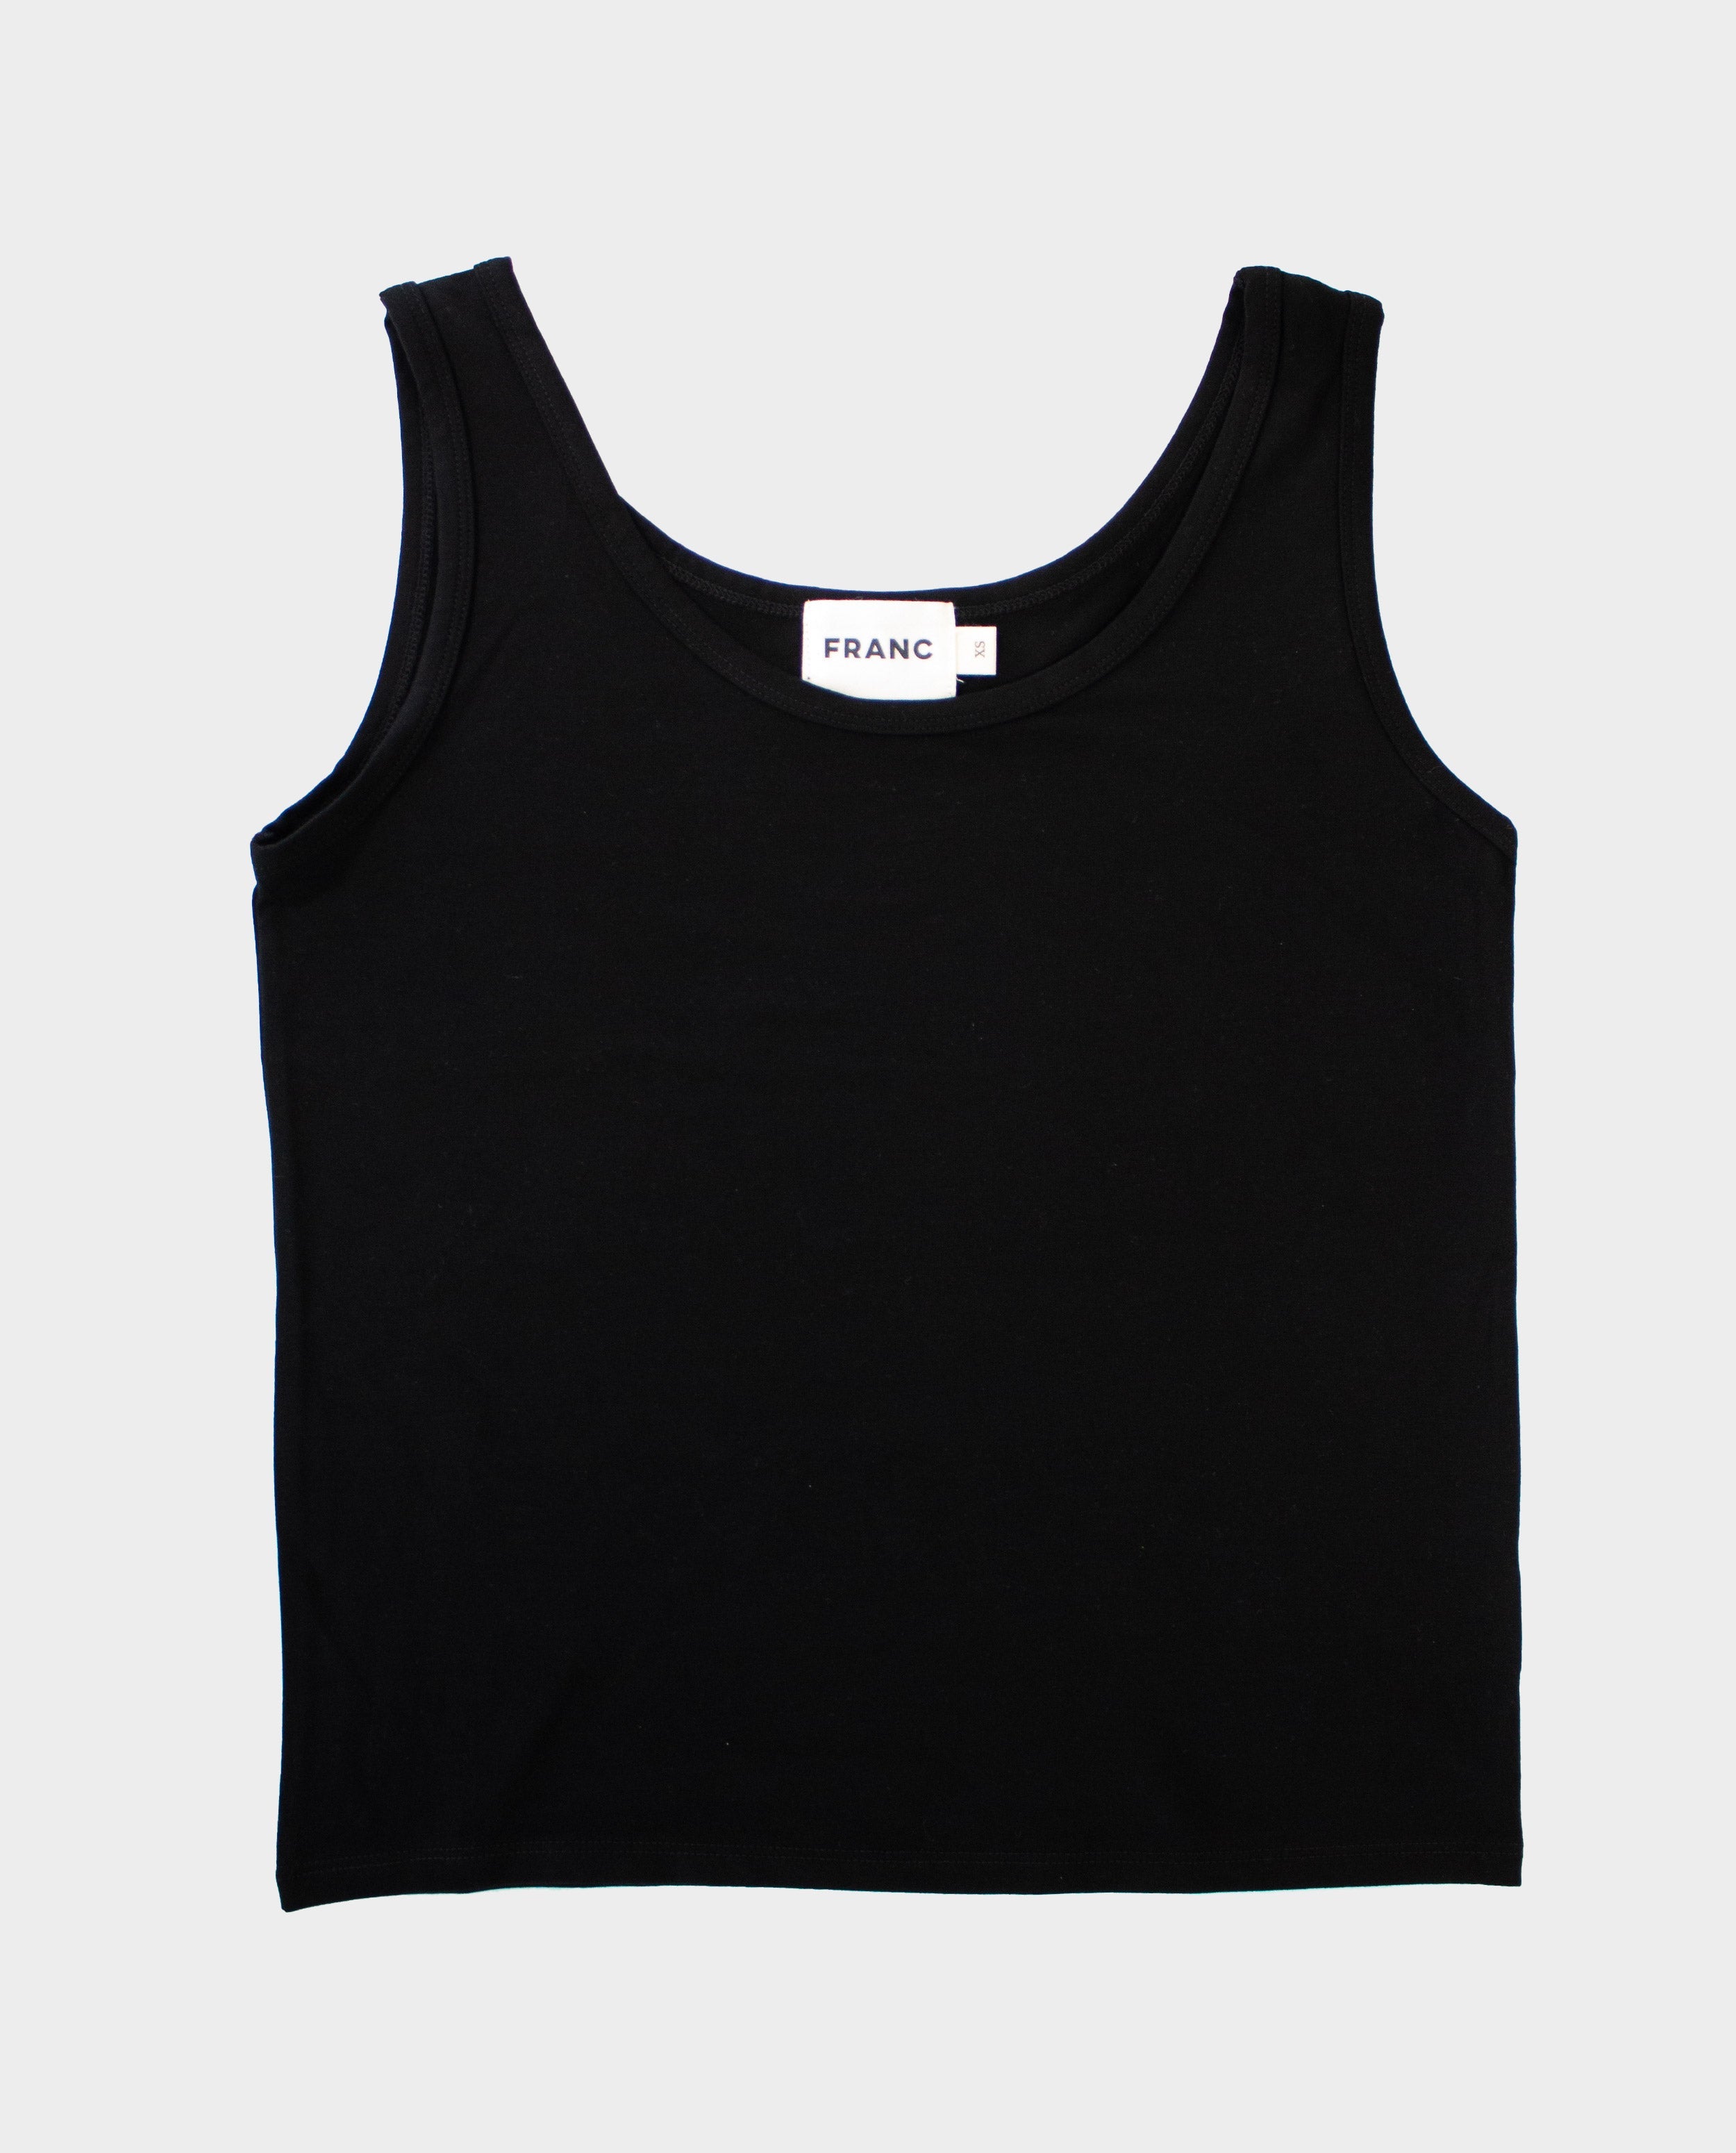 The Sale Boxy Scoop Tank | FRANC Sustainable Clothing